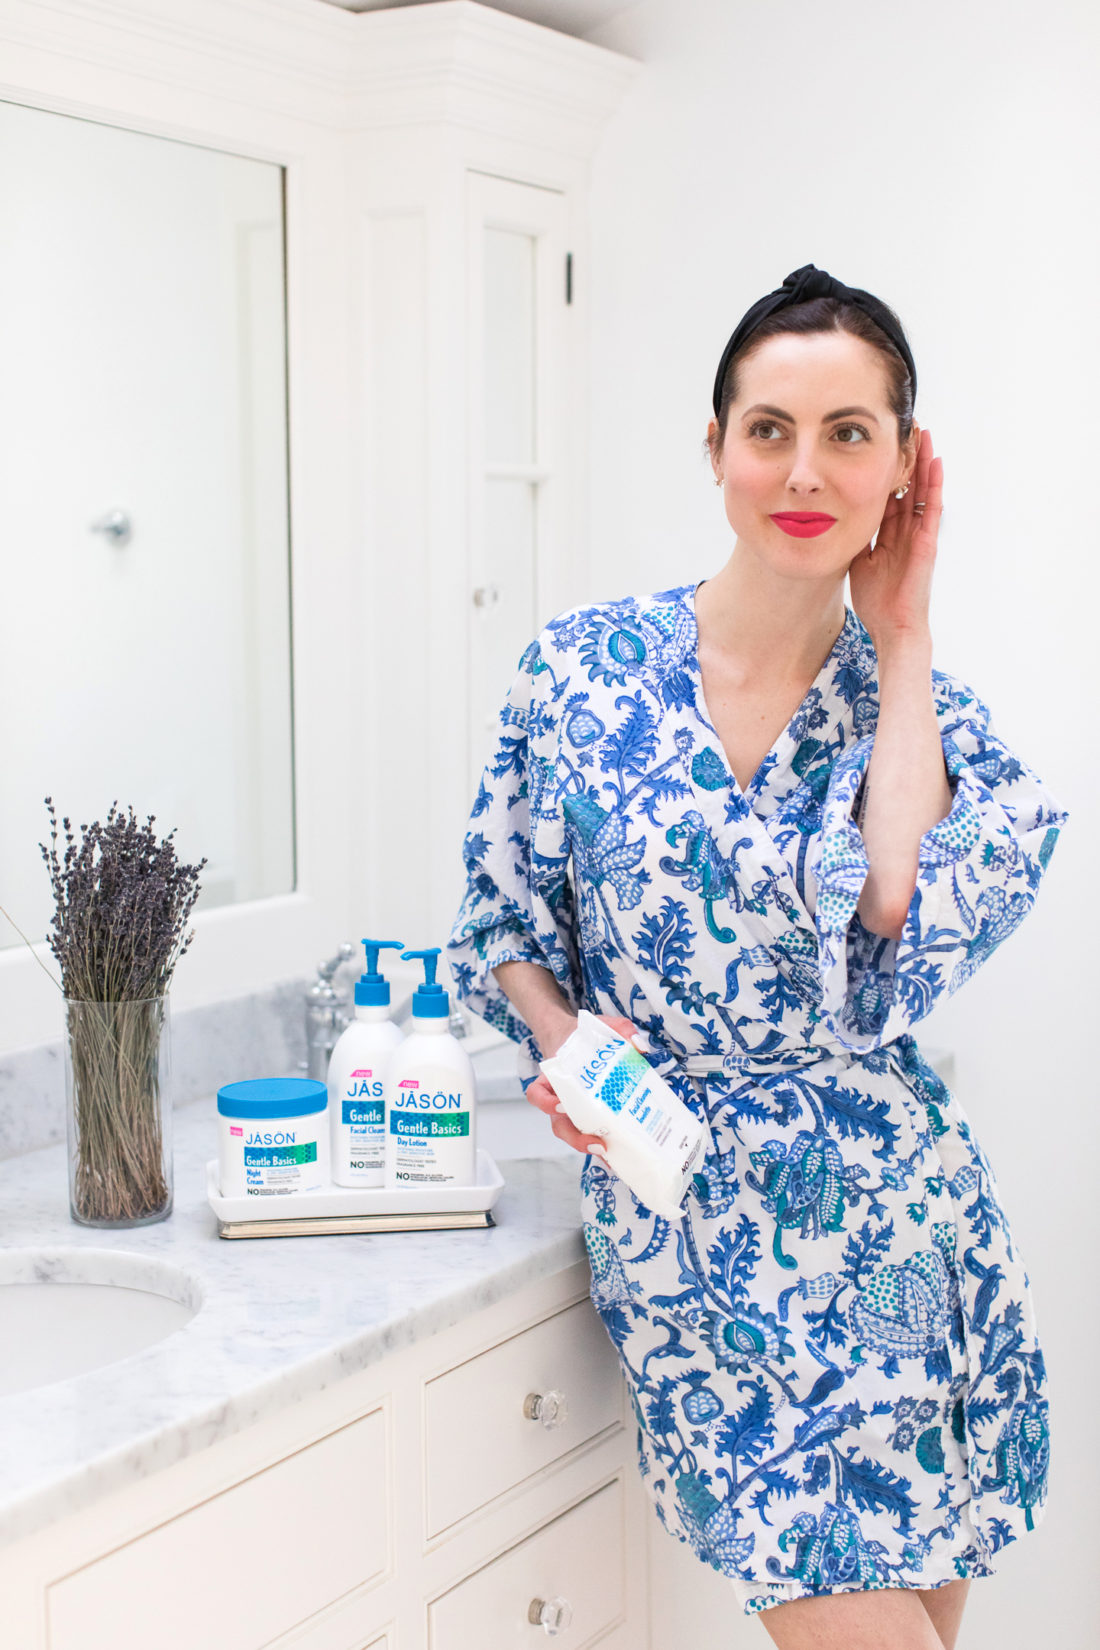 Eva Amurri Martino stands in her master bathroom in a blue patterned summer robe and pink lipstick preparing to wash off her daily makeup